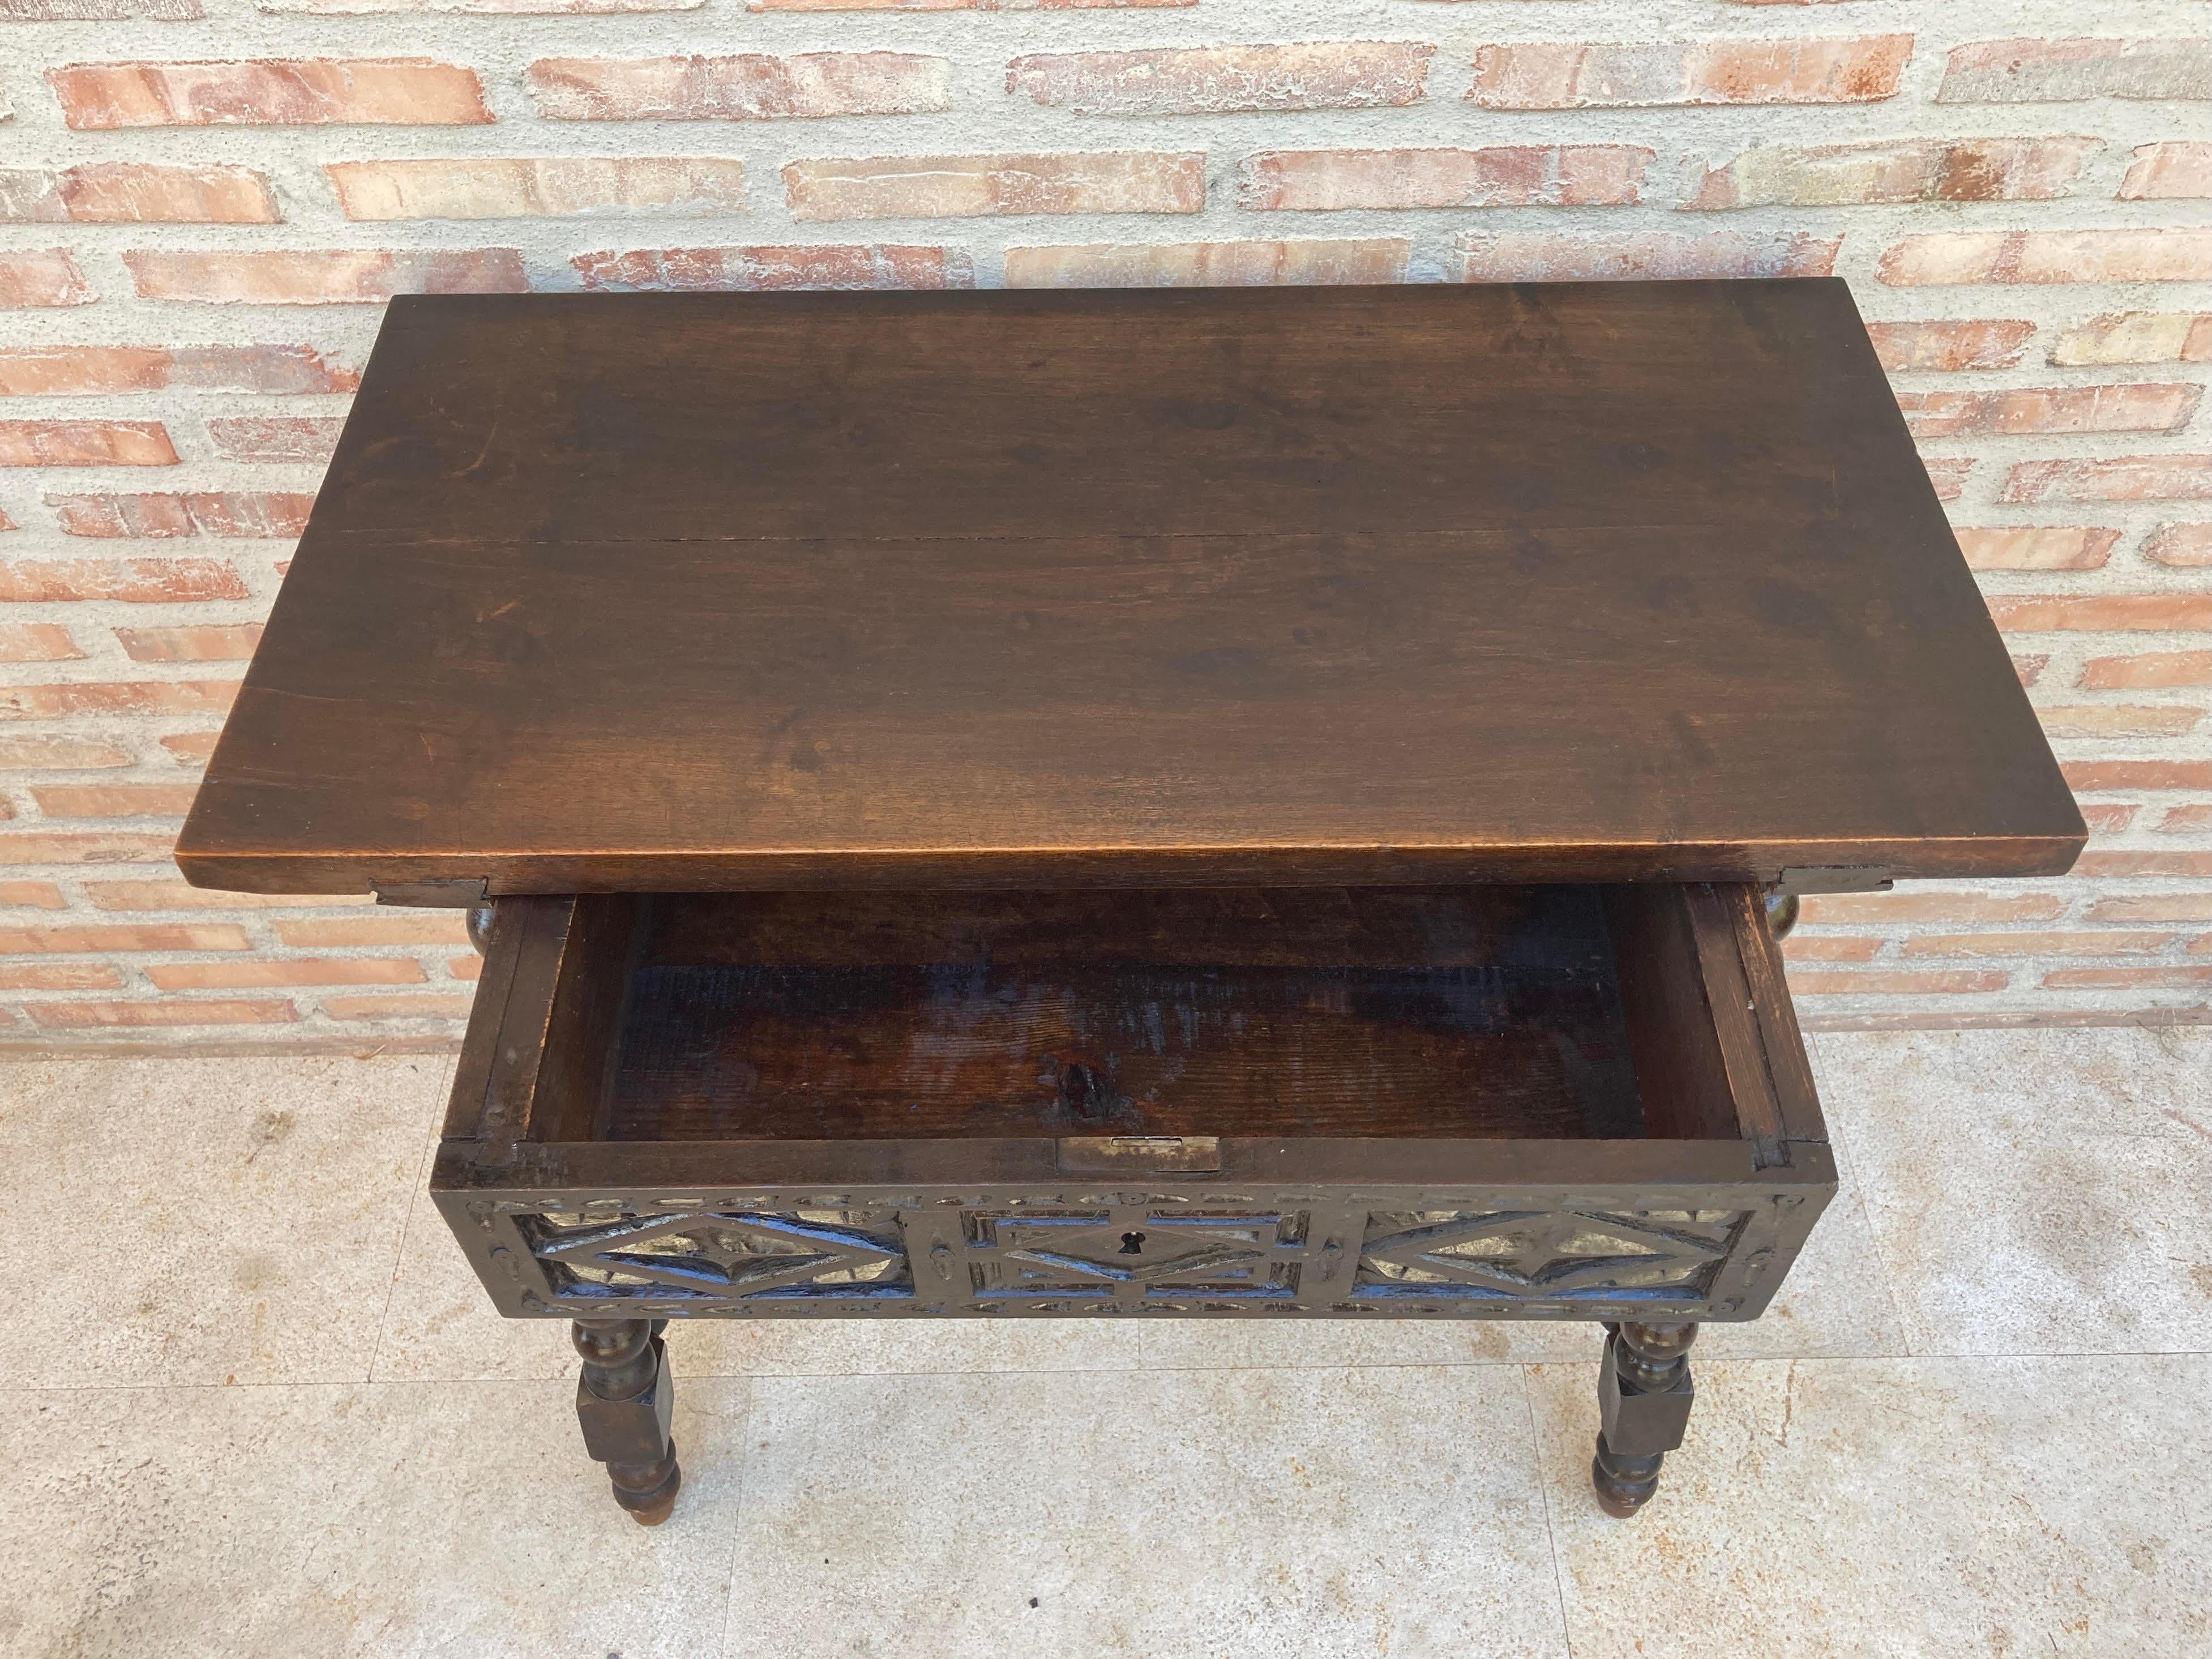 19th Century Spanish Walnut Side Table with Turned Legs, Flat Top with a Lockabl 6